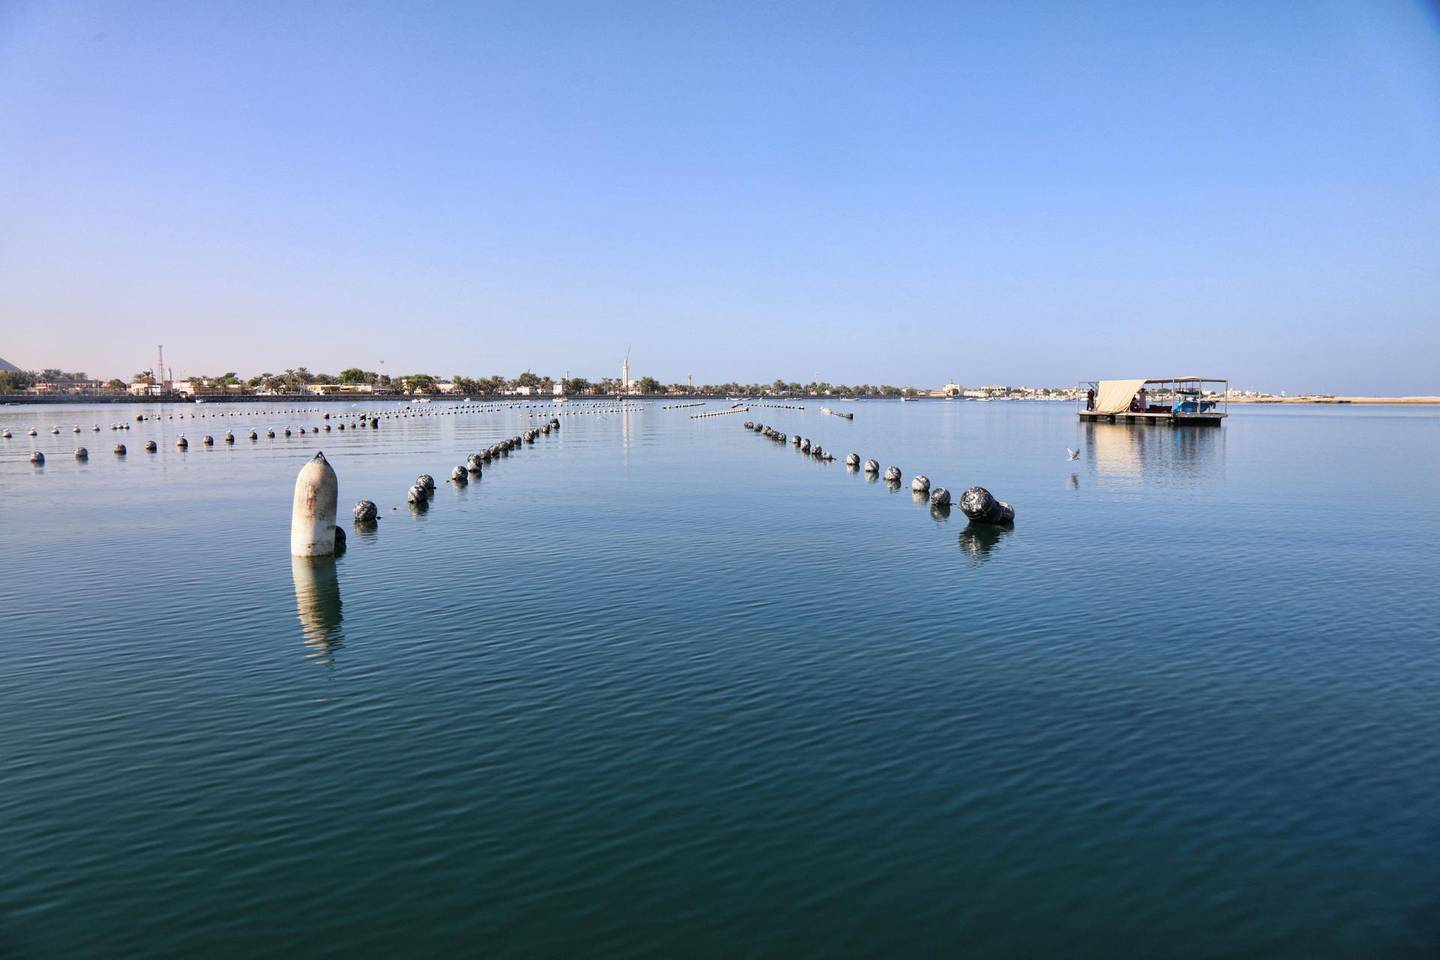 Travellers who book three nights or more in any Ras Al Khaimah hotel this summer, can get free passes to tour the Al Suwaidi Pearl Farm. Photo Courtesy: Ministry of Climate Change and Environment